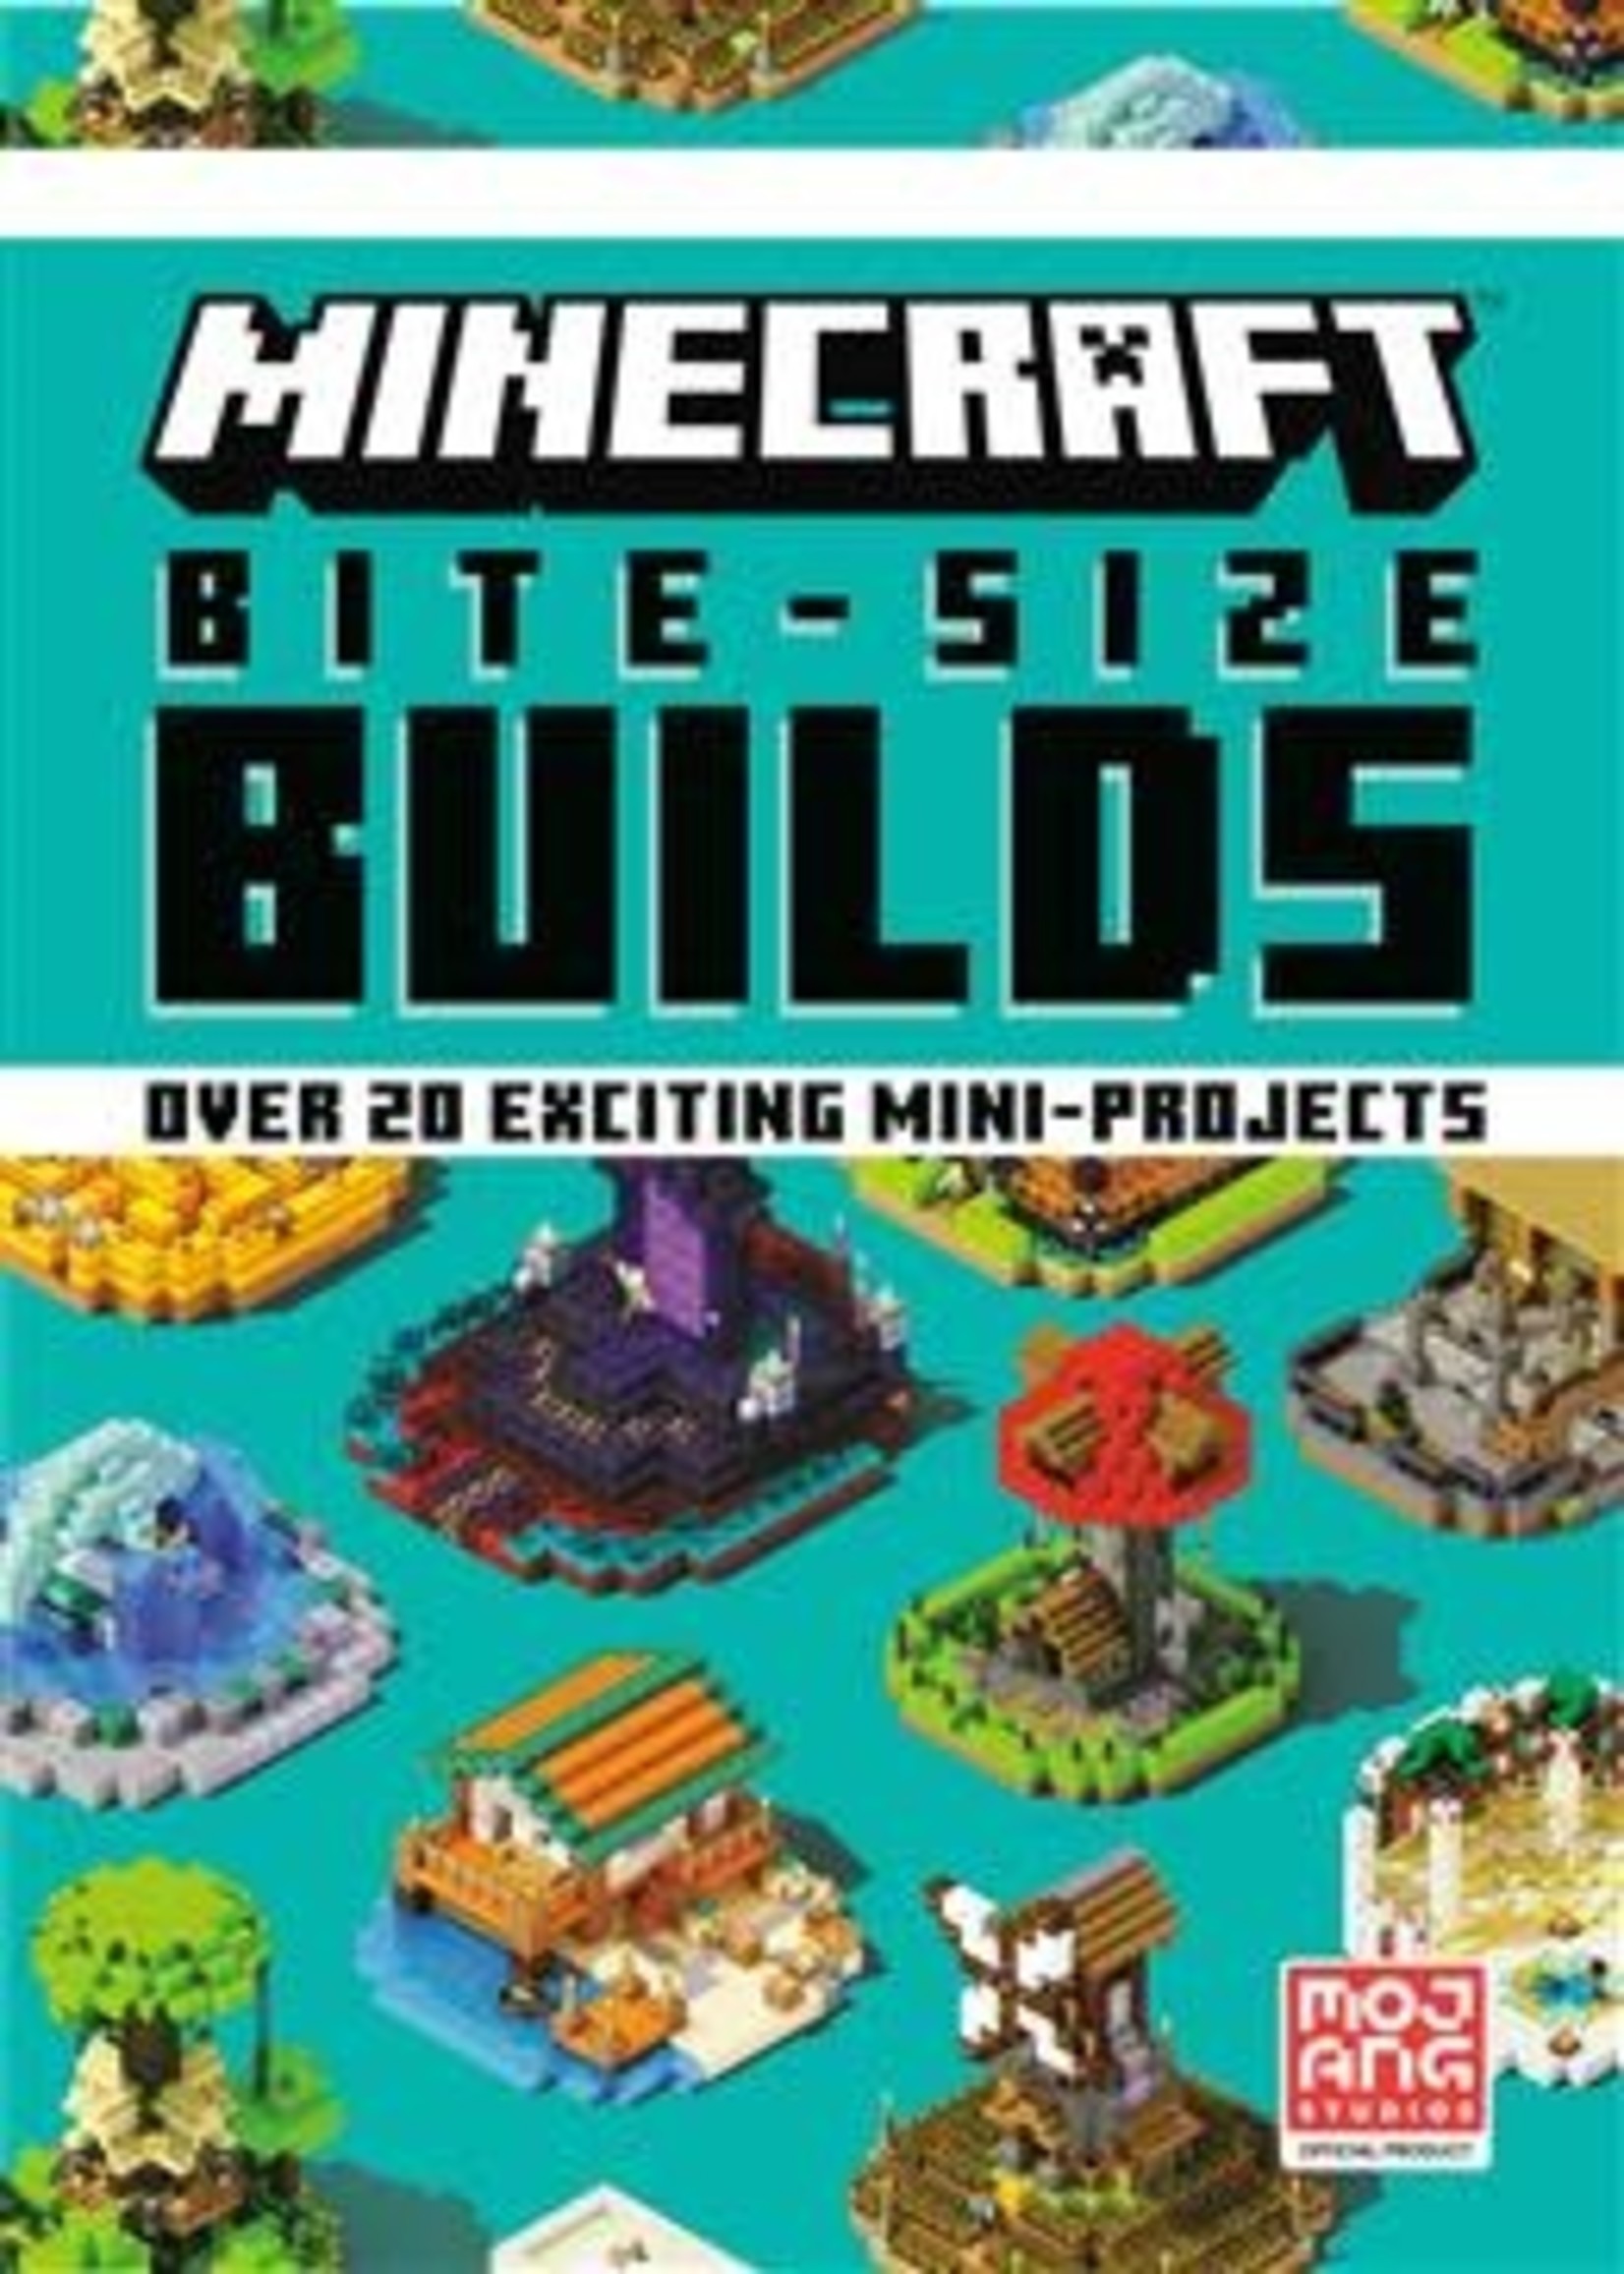 Minecraft Bite-Size Builds by The Official Minecraft Team